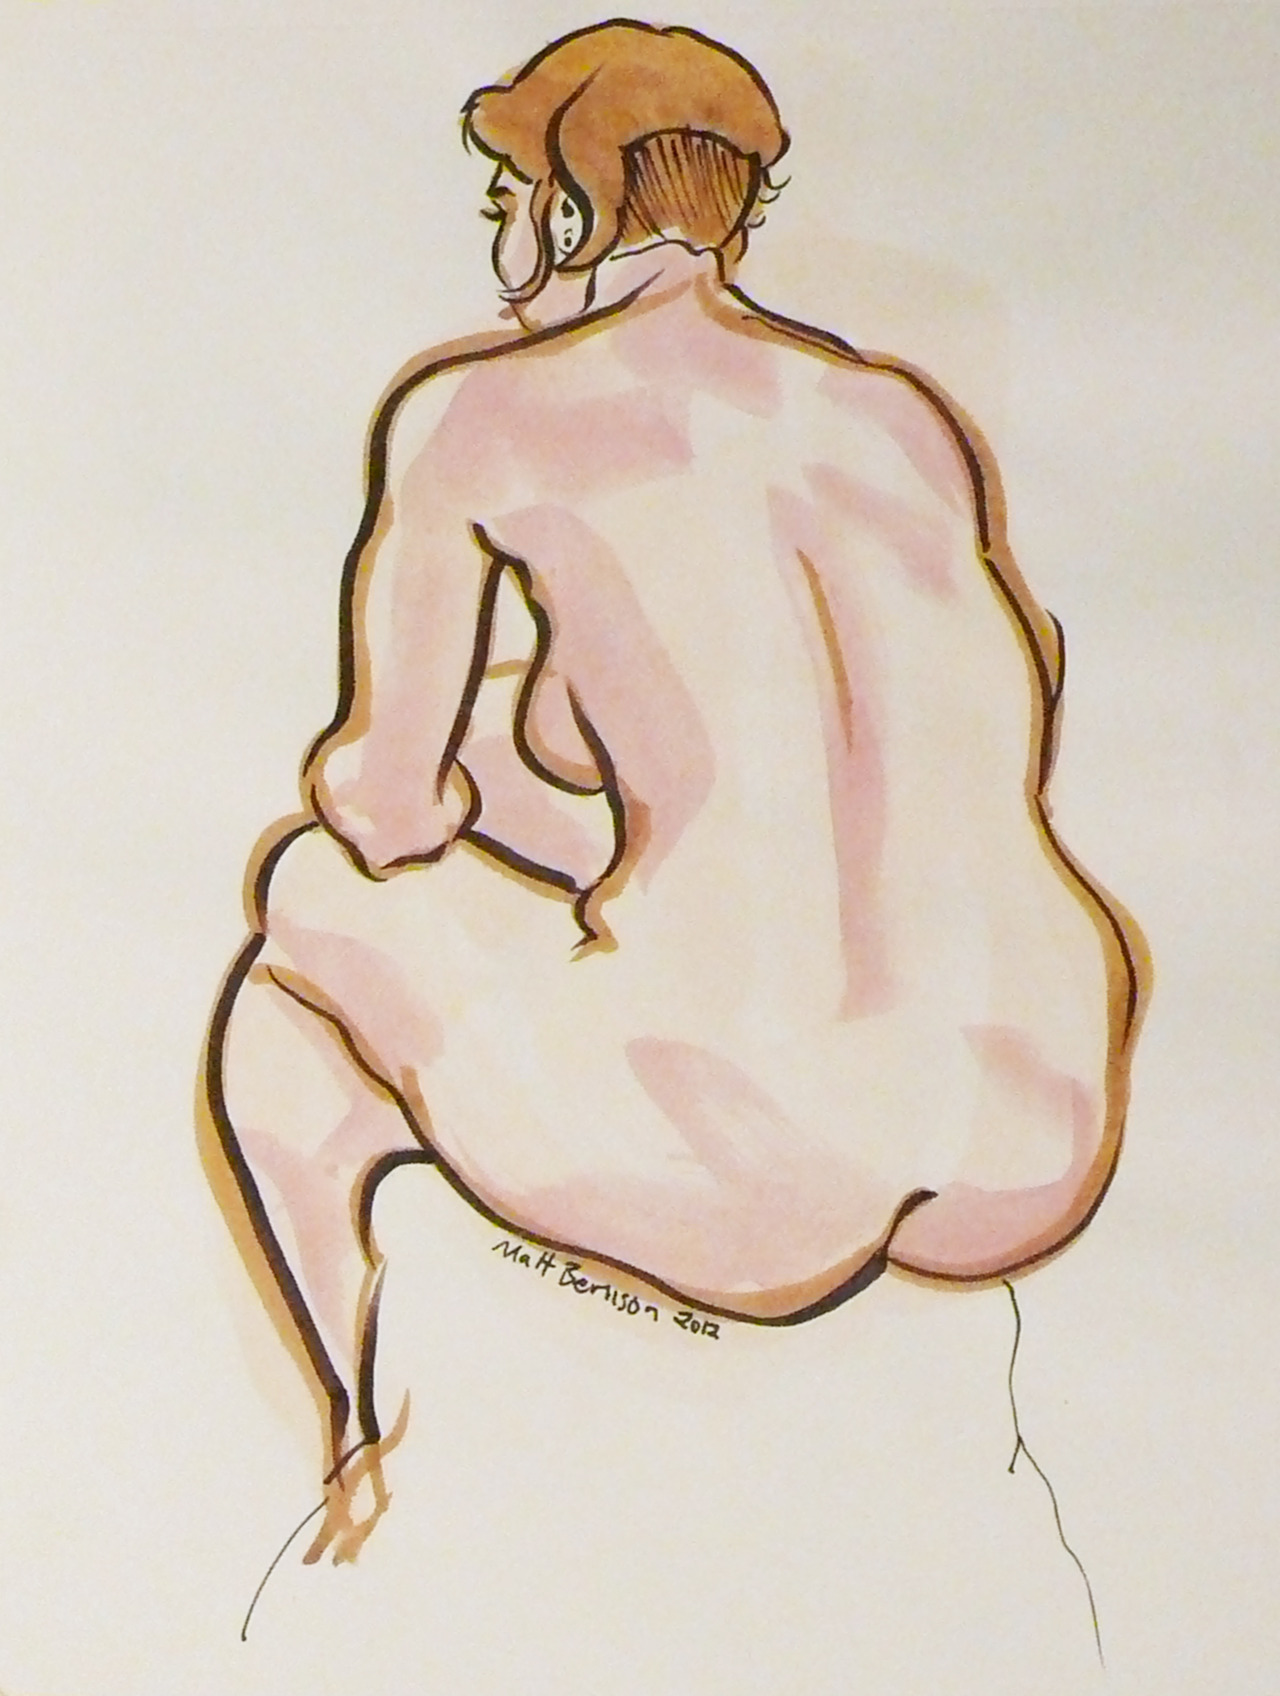 More figure drawing that I did at the open figure session at the Eliot School in